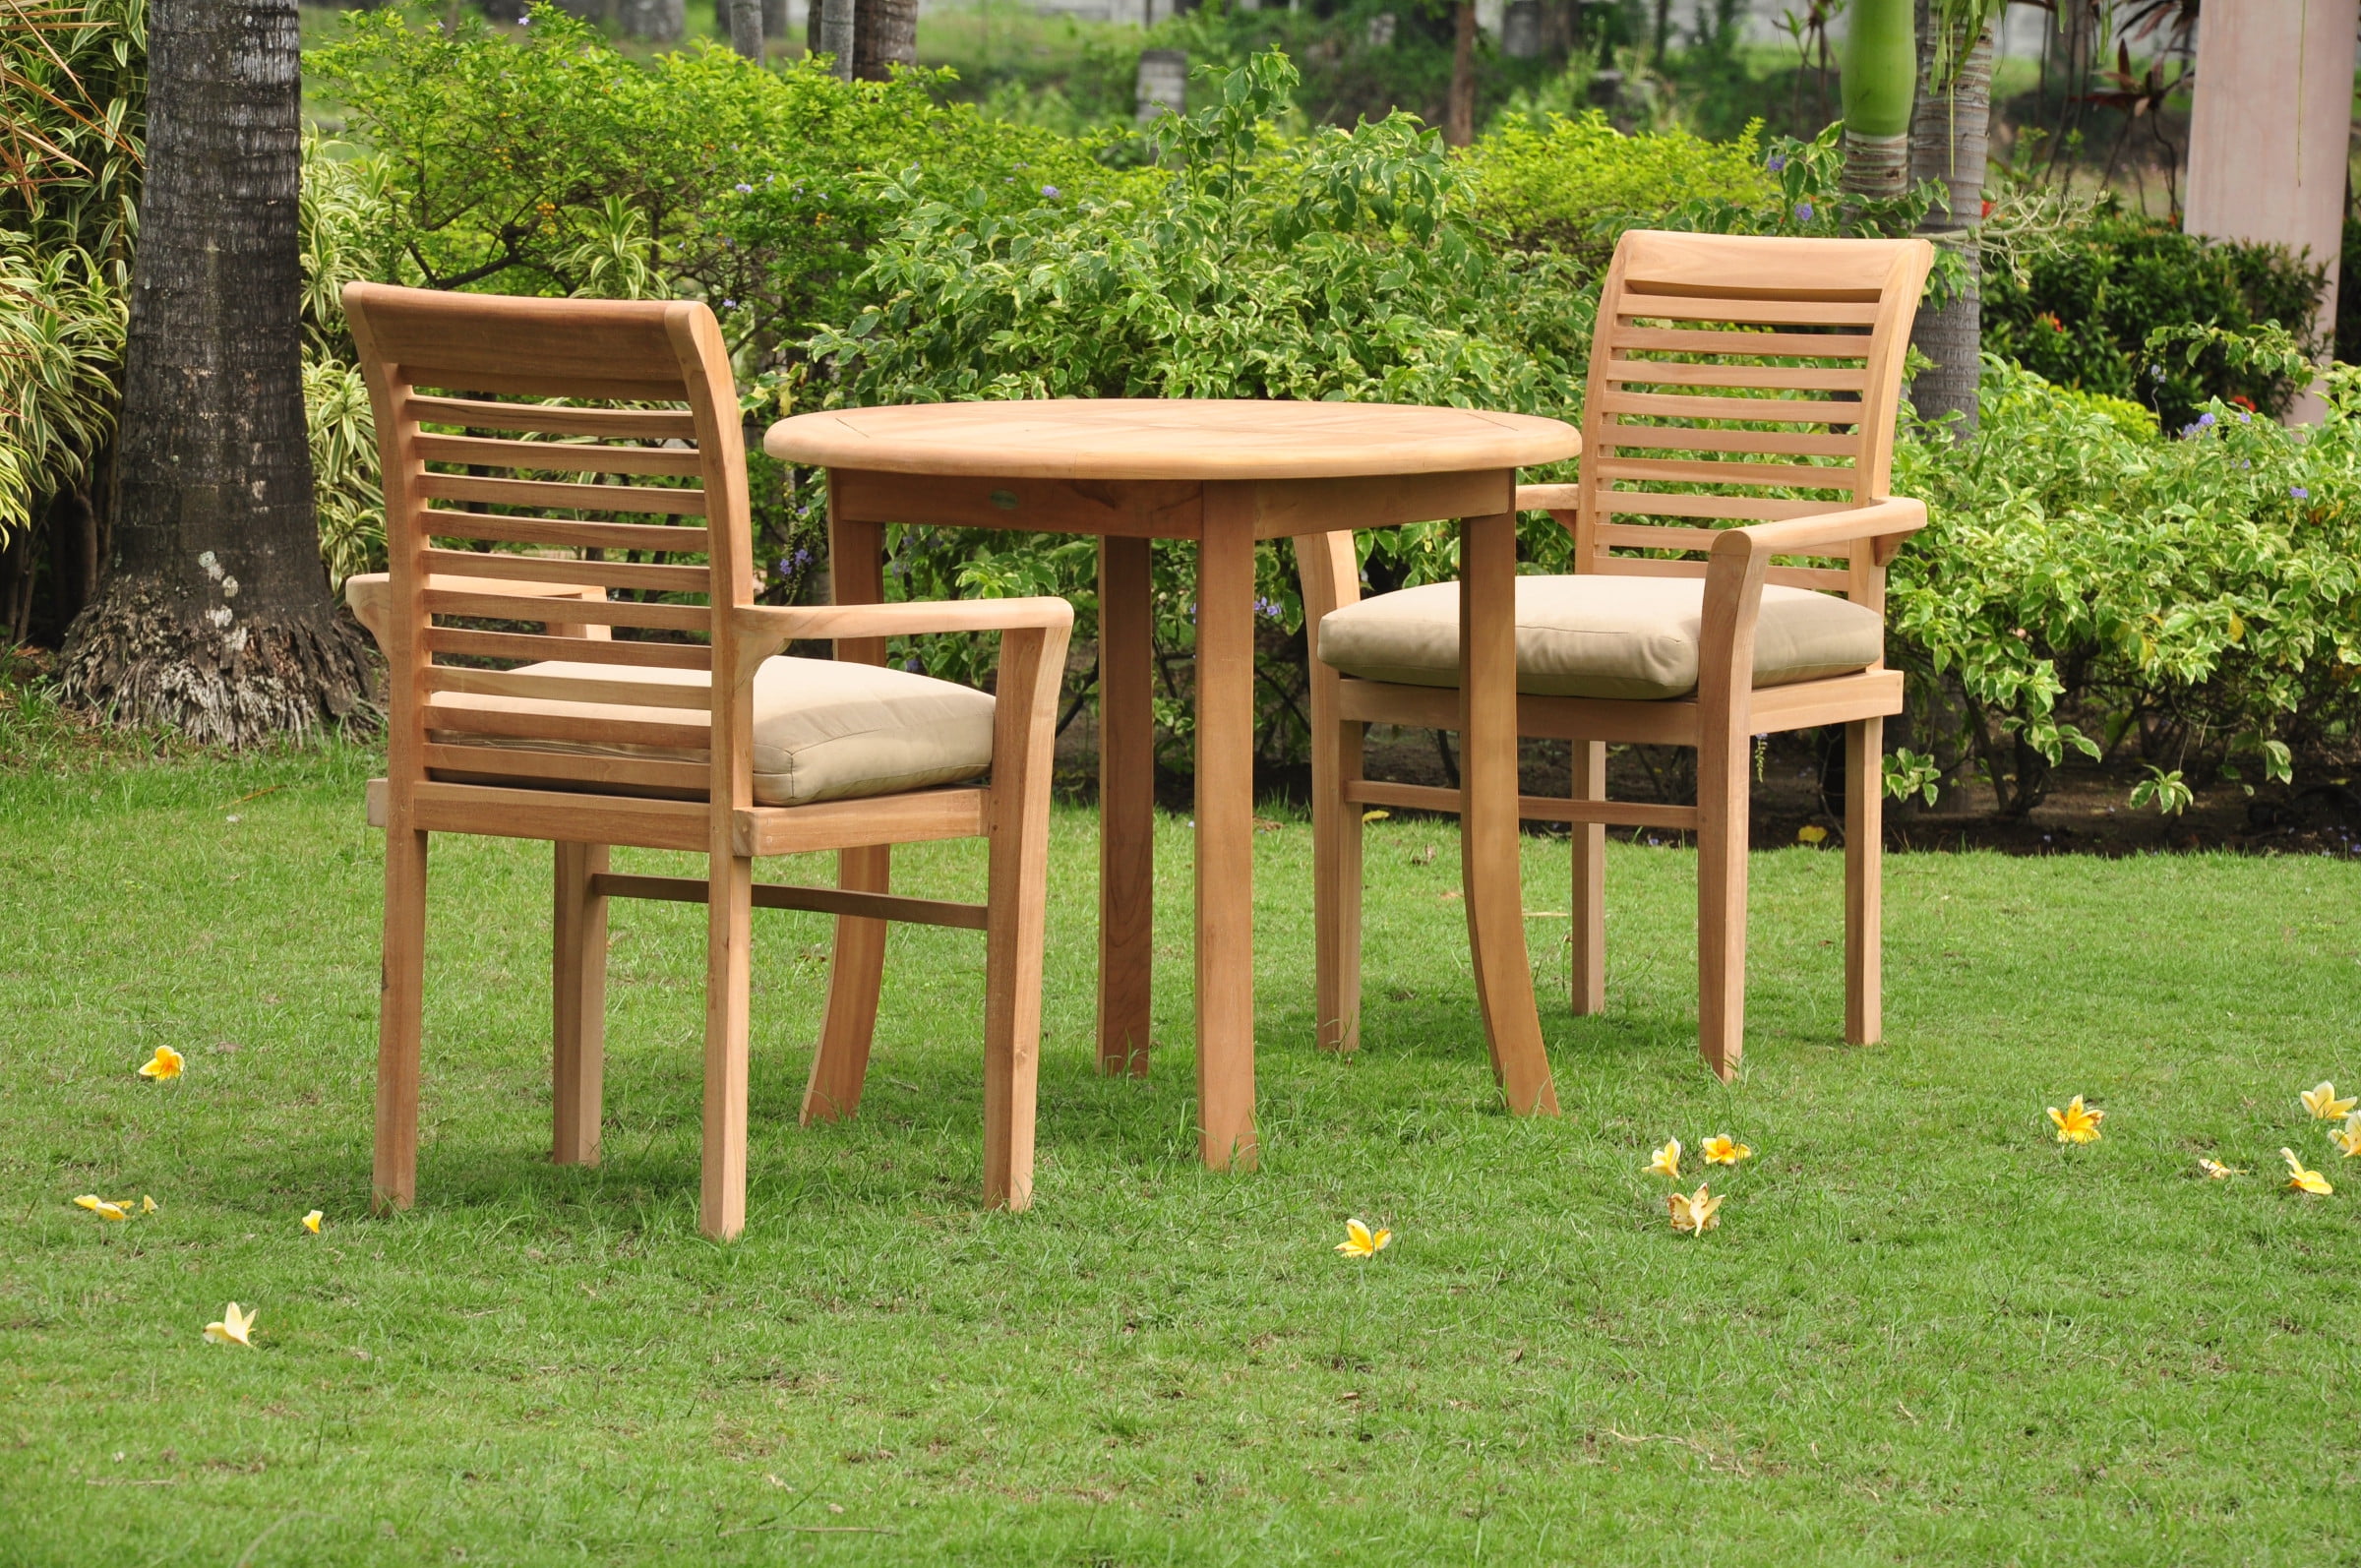 Why Teak Is The Gold Standard For Outdoor Furniture Sets